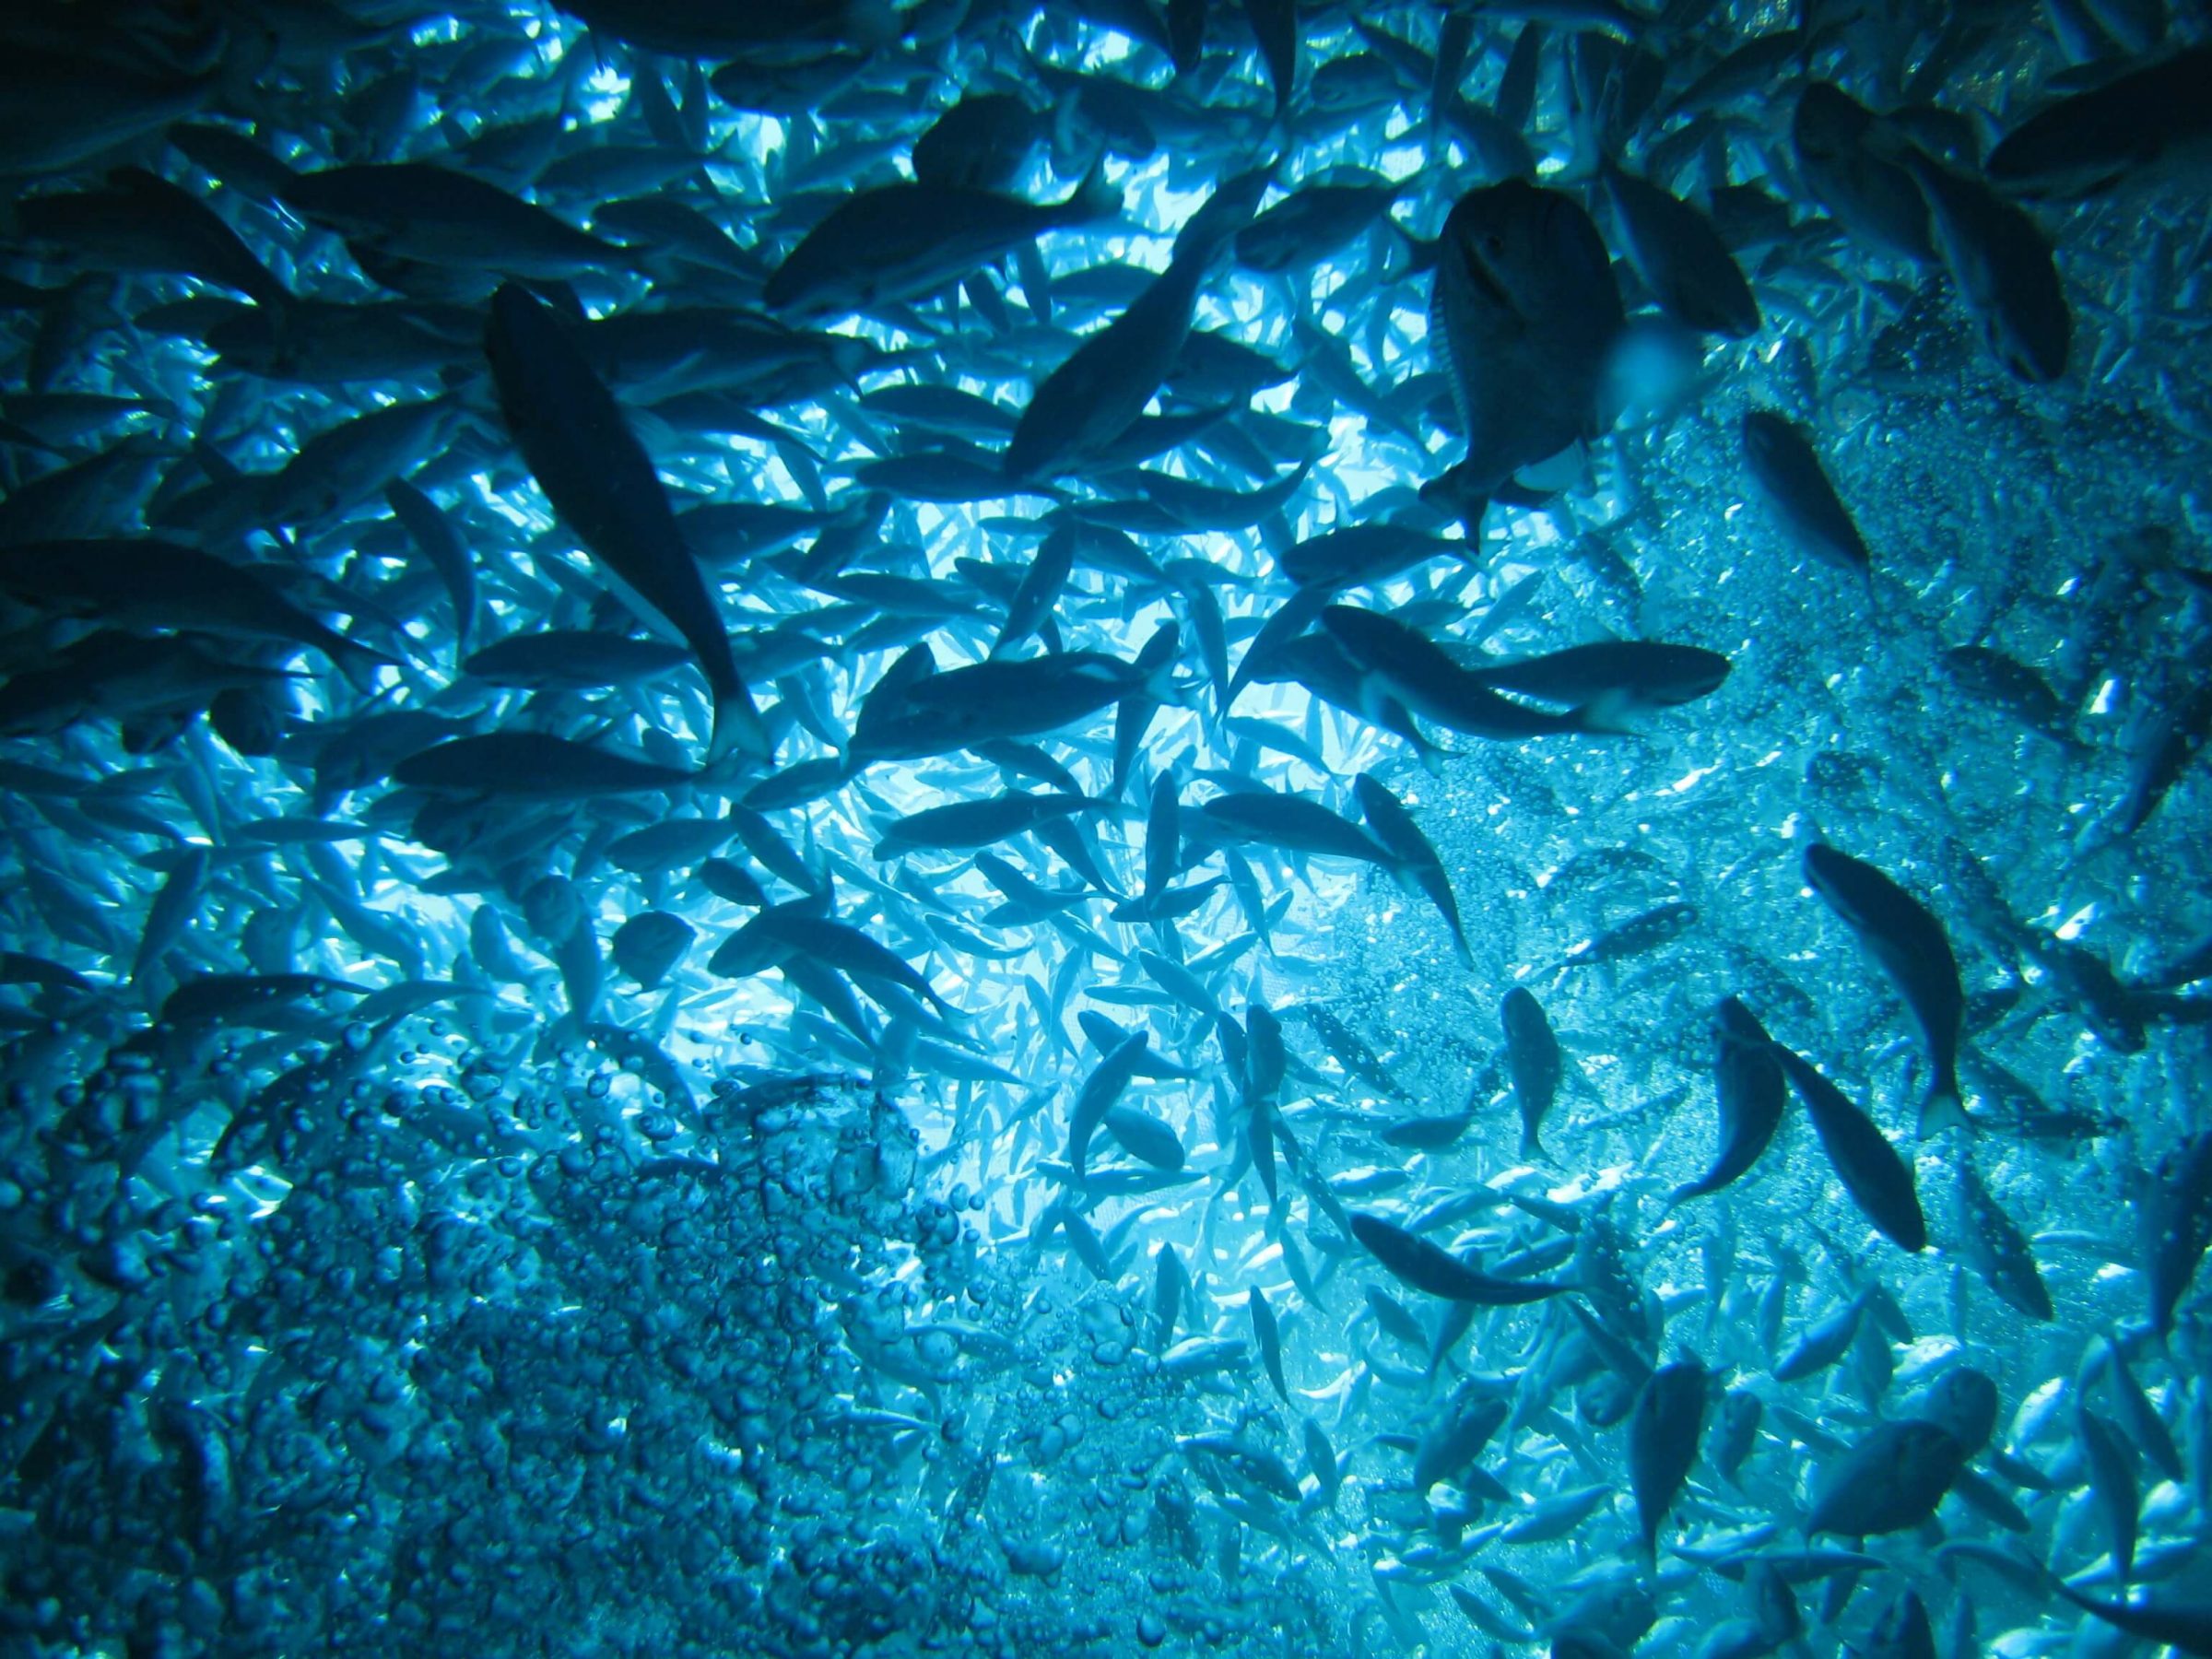 In water image of flurry of hundreds of fish and bubbles